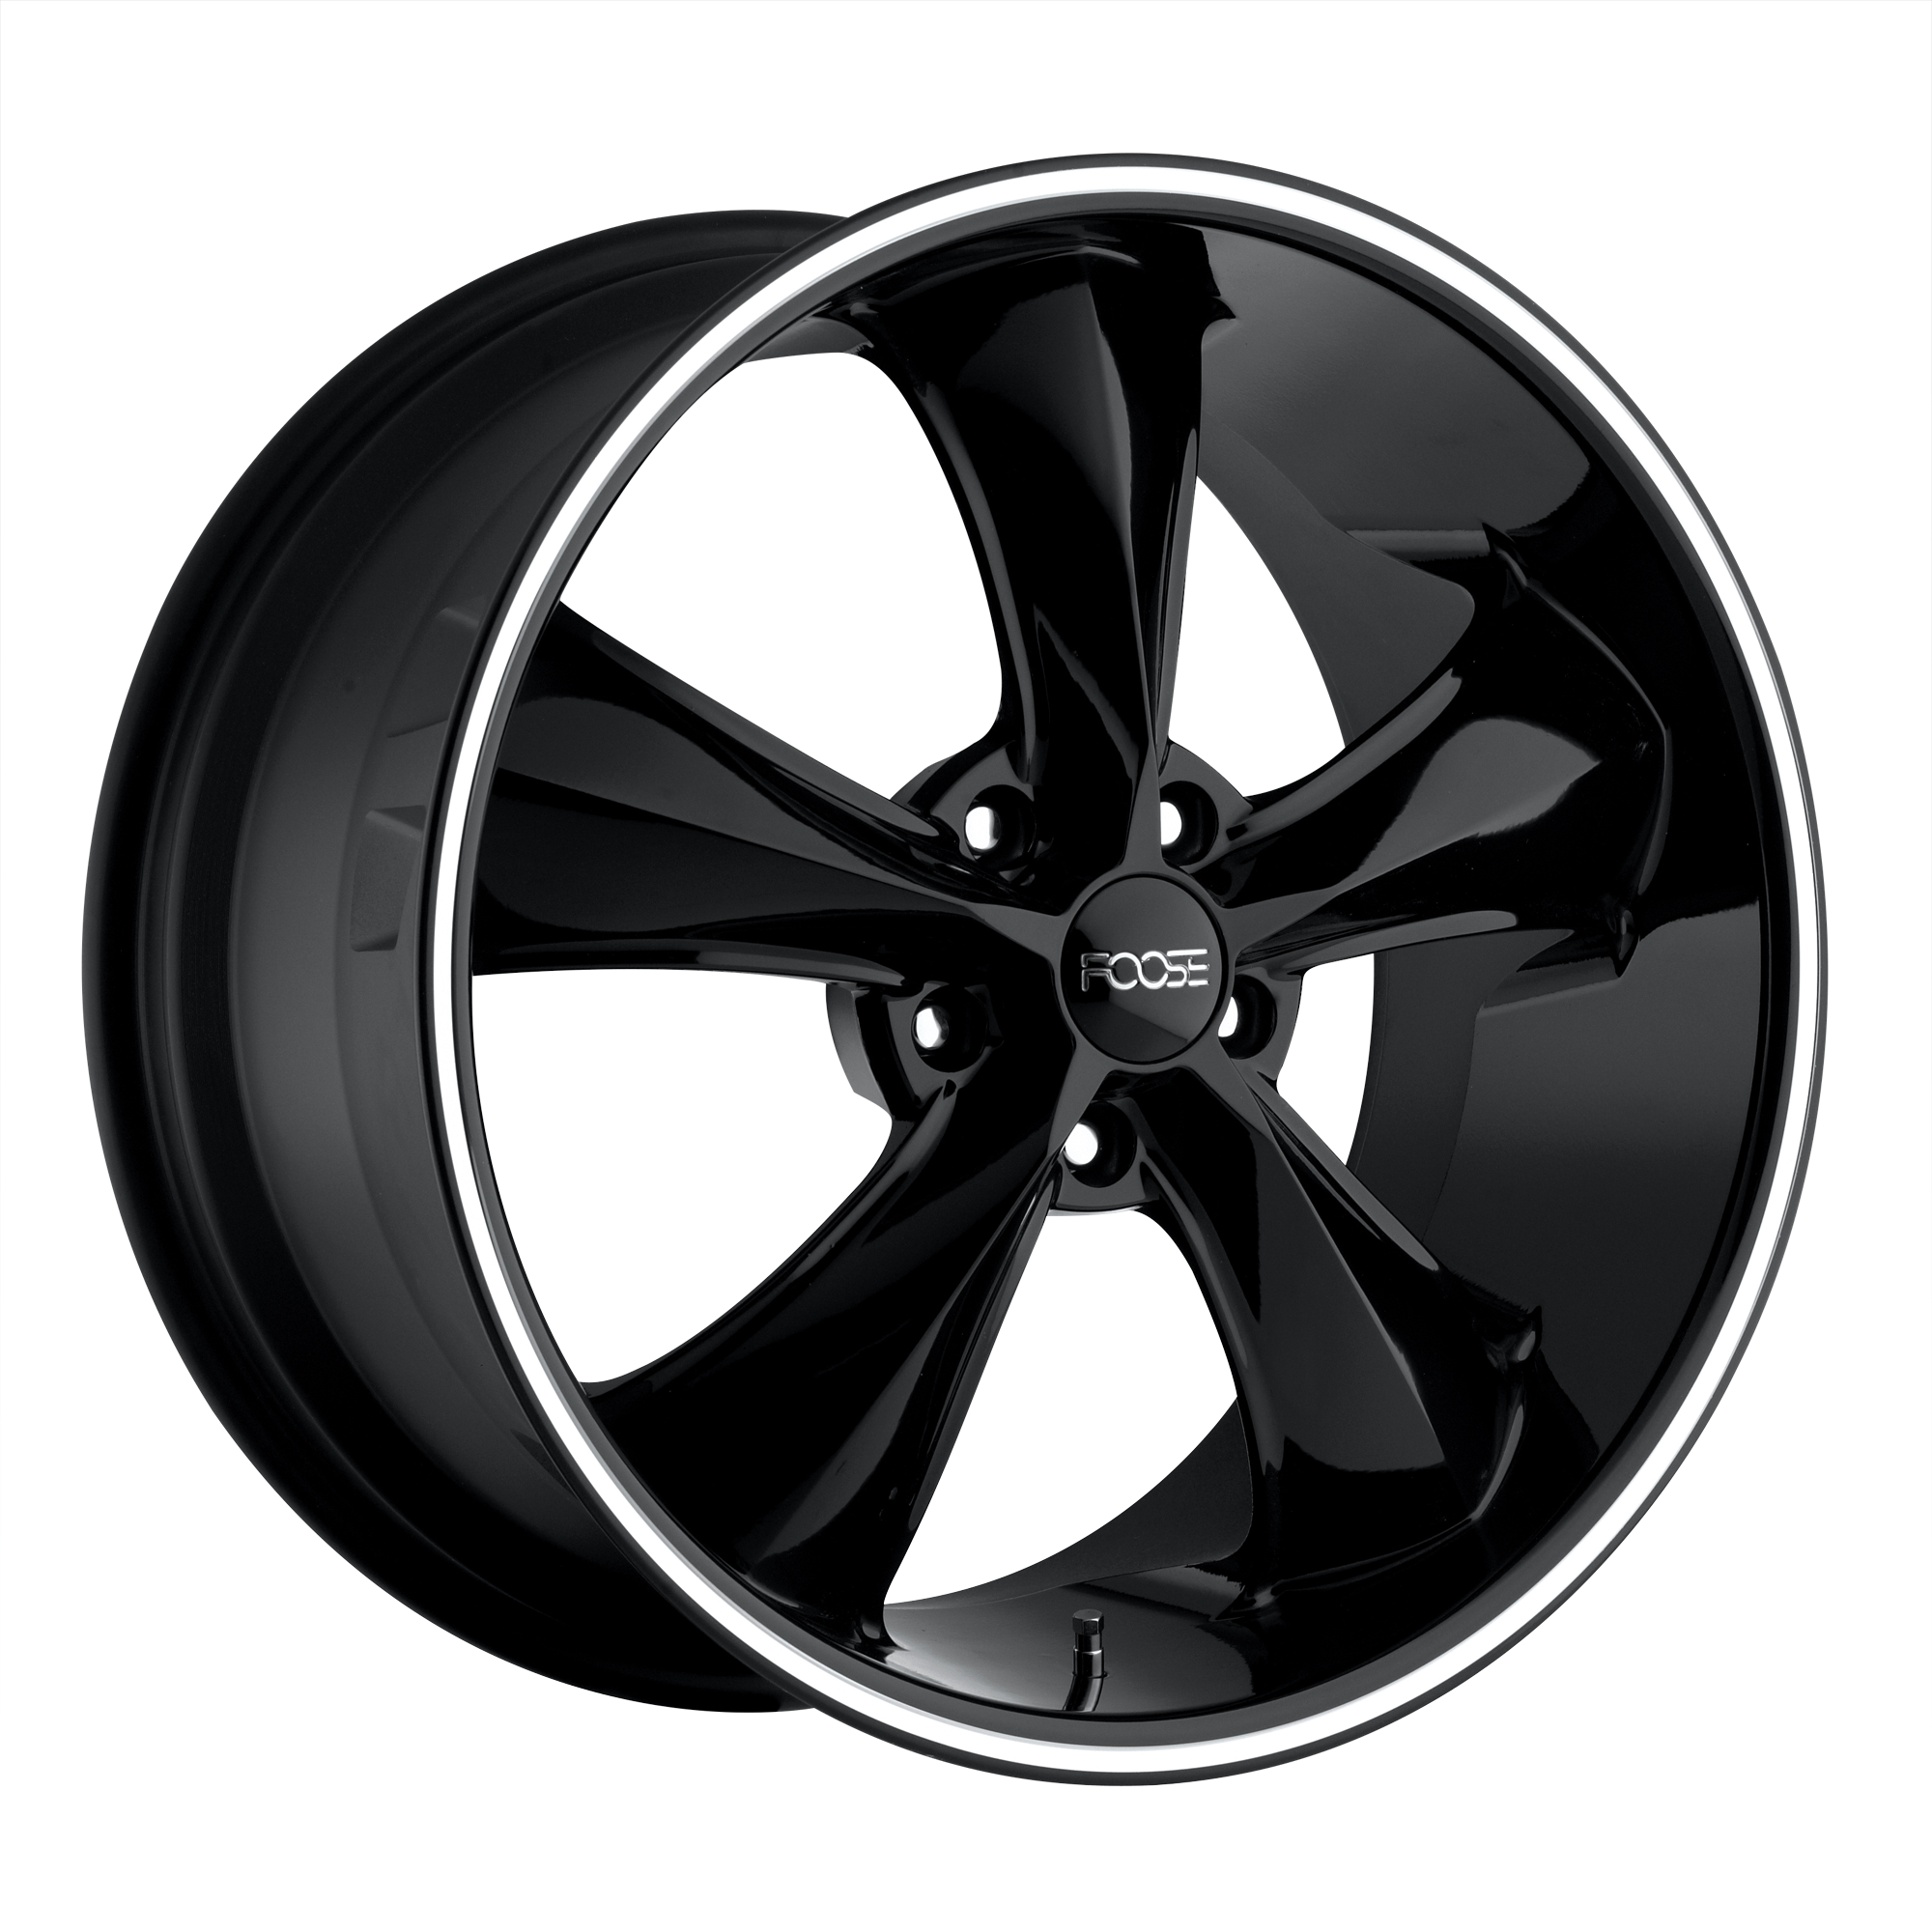 LEGEND 18x8 5x120.65 GLOSS BLACK MILLED (1 mm) - Tires and Engine Performance